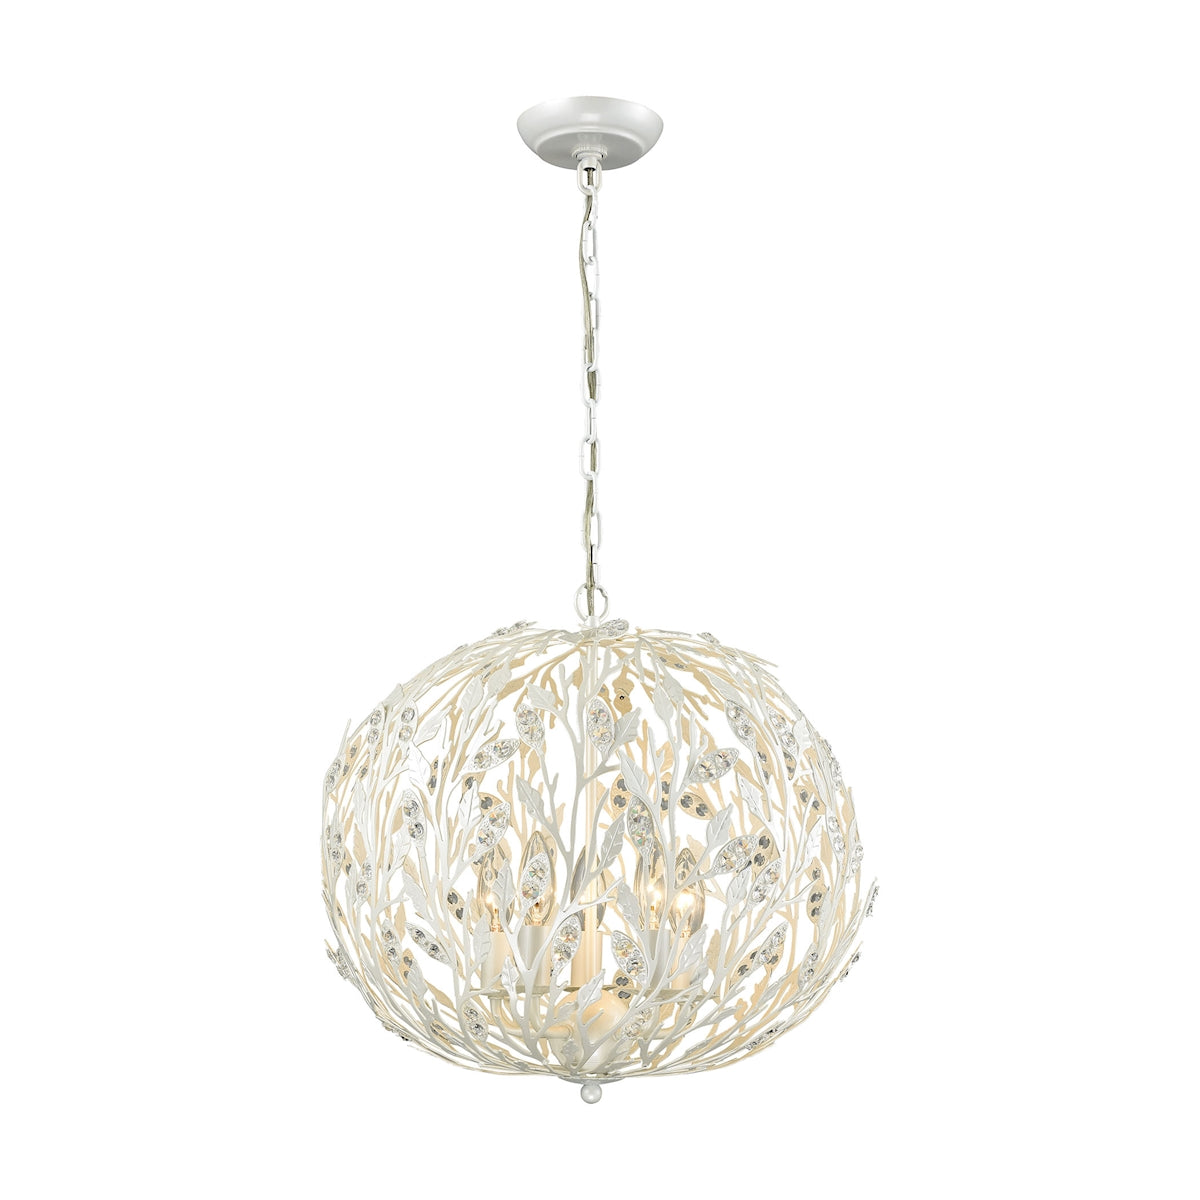 ELK Lighting 18185/5 Trella 5-Light Chandelier in Pearl White with Clear Crystal and Openwork Metal Shade